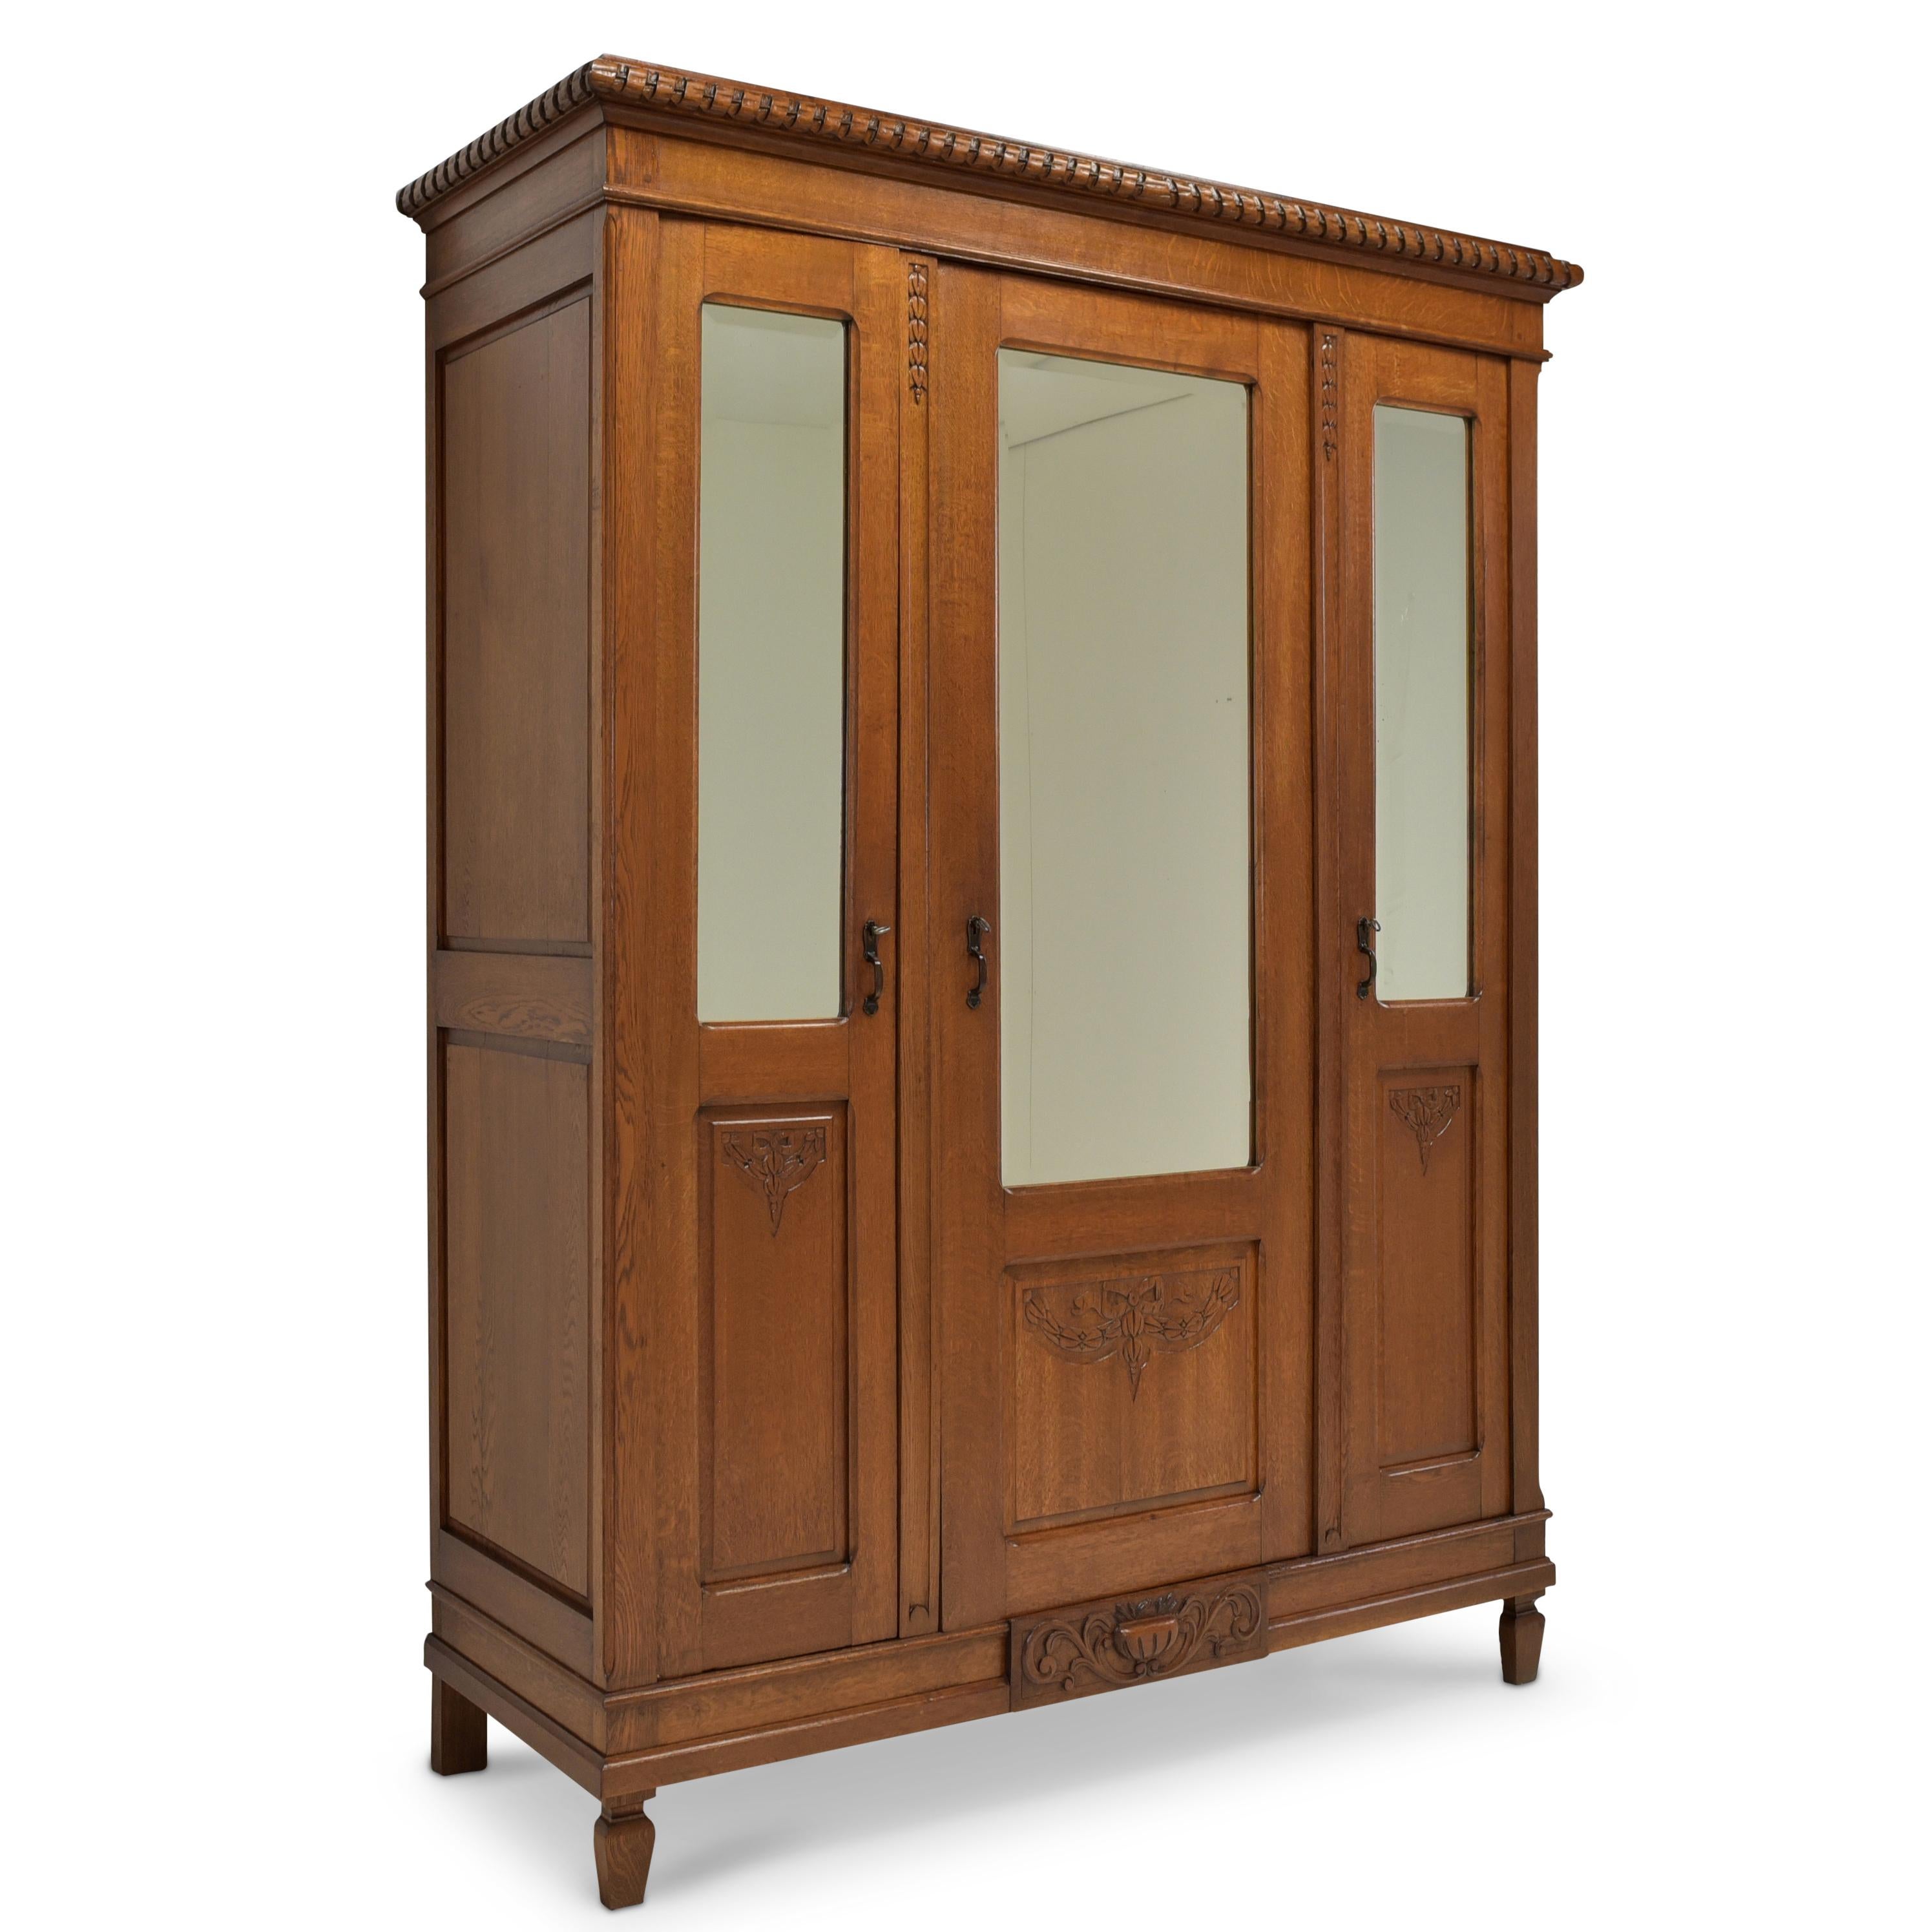 Hallway wardrobe restored Art Deco / Louis XVI 1920 oak wardrobe

Features:
Three-door model with three mirrors and clothes rail
High quality
Cassette fillings
Original faceted mirror
Straight basic form with carved decorations
Attractive,